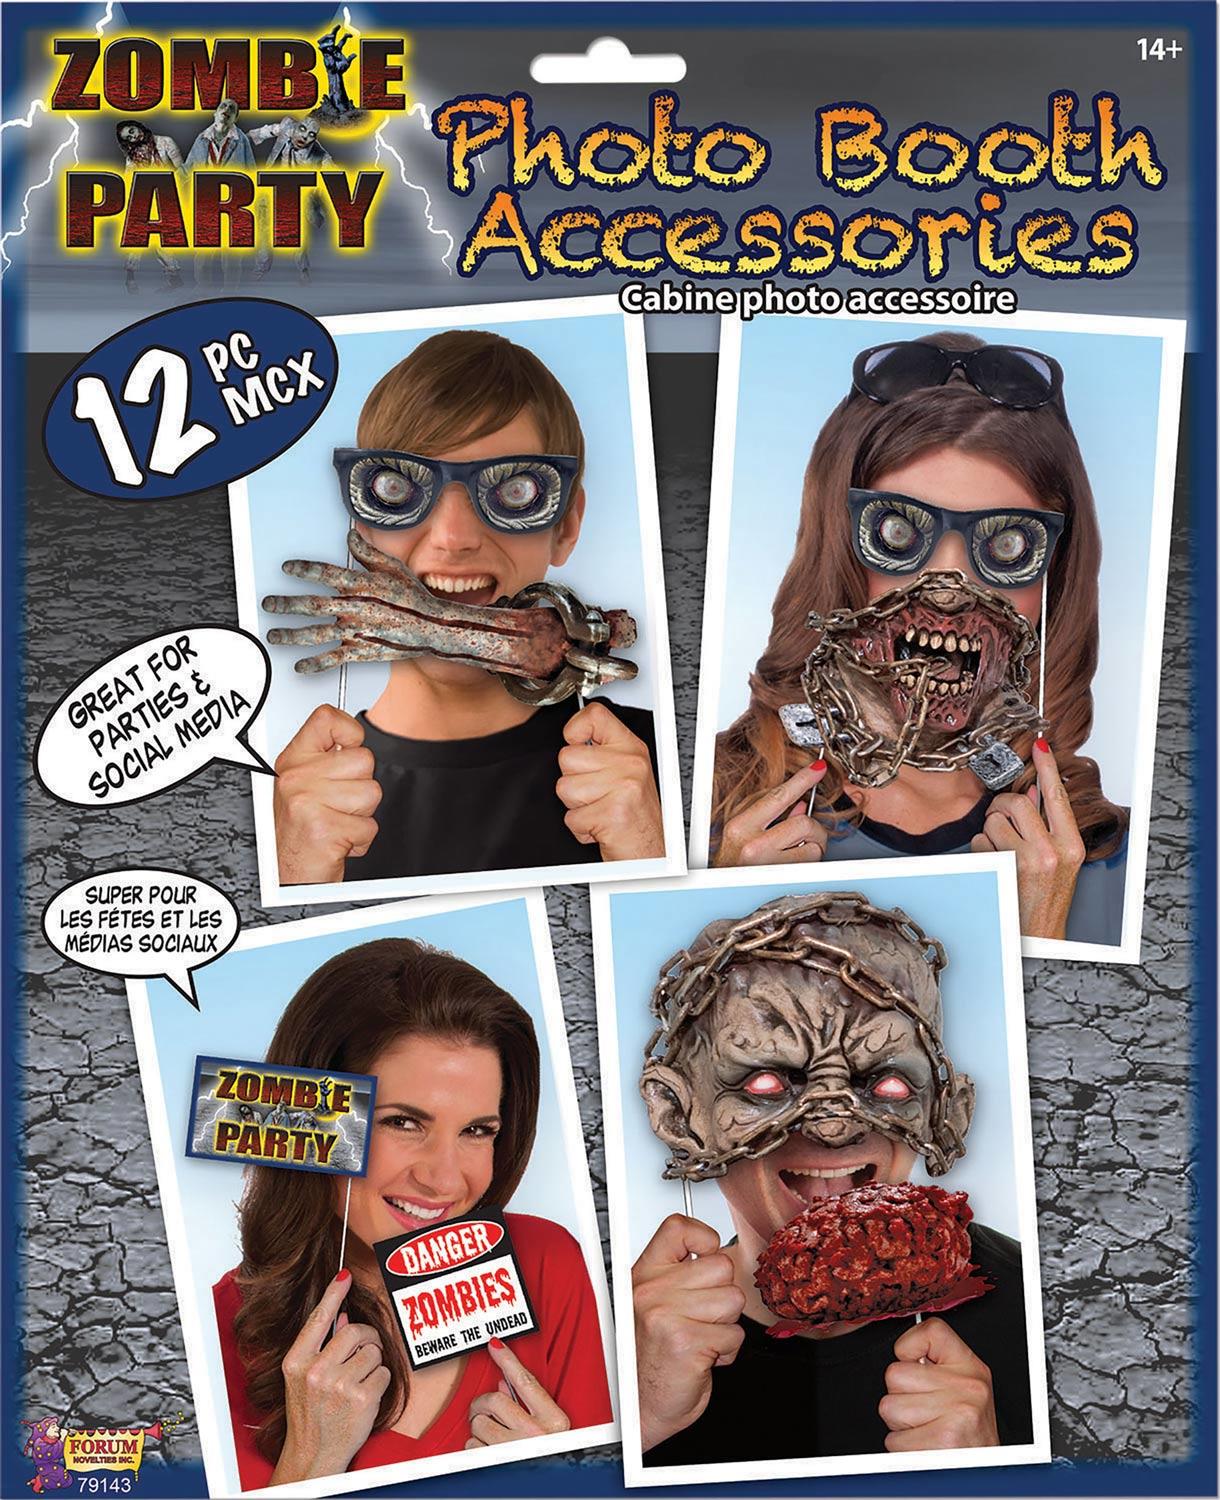 12pc Zombie Photo Booth Props Kit by Forum Novelties 79143 available from a collection of zombie items here at Karnival Costumes online party goods